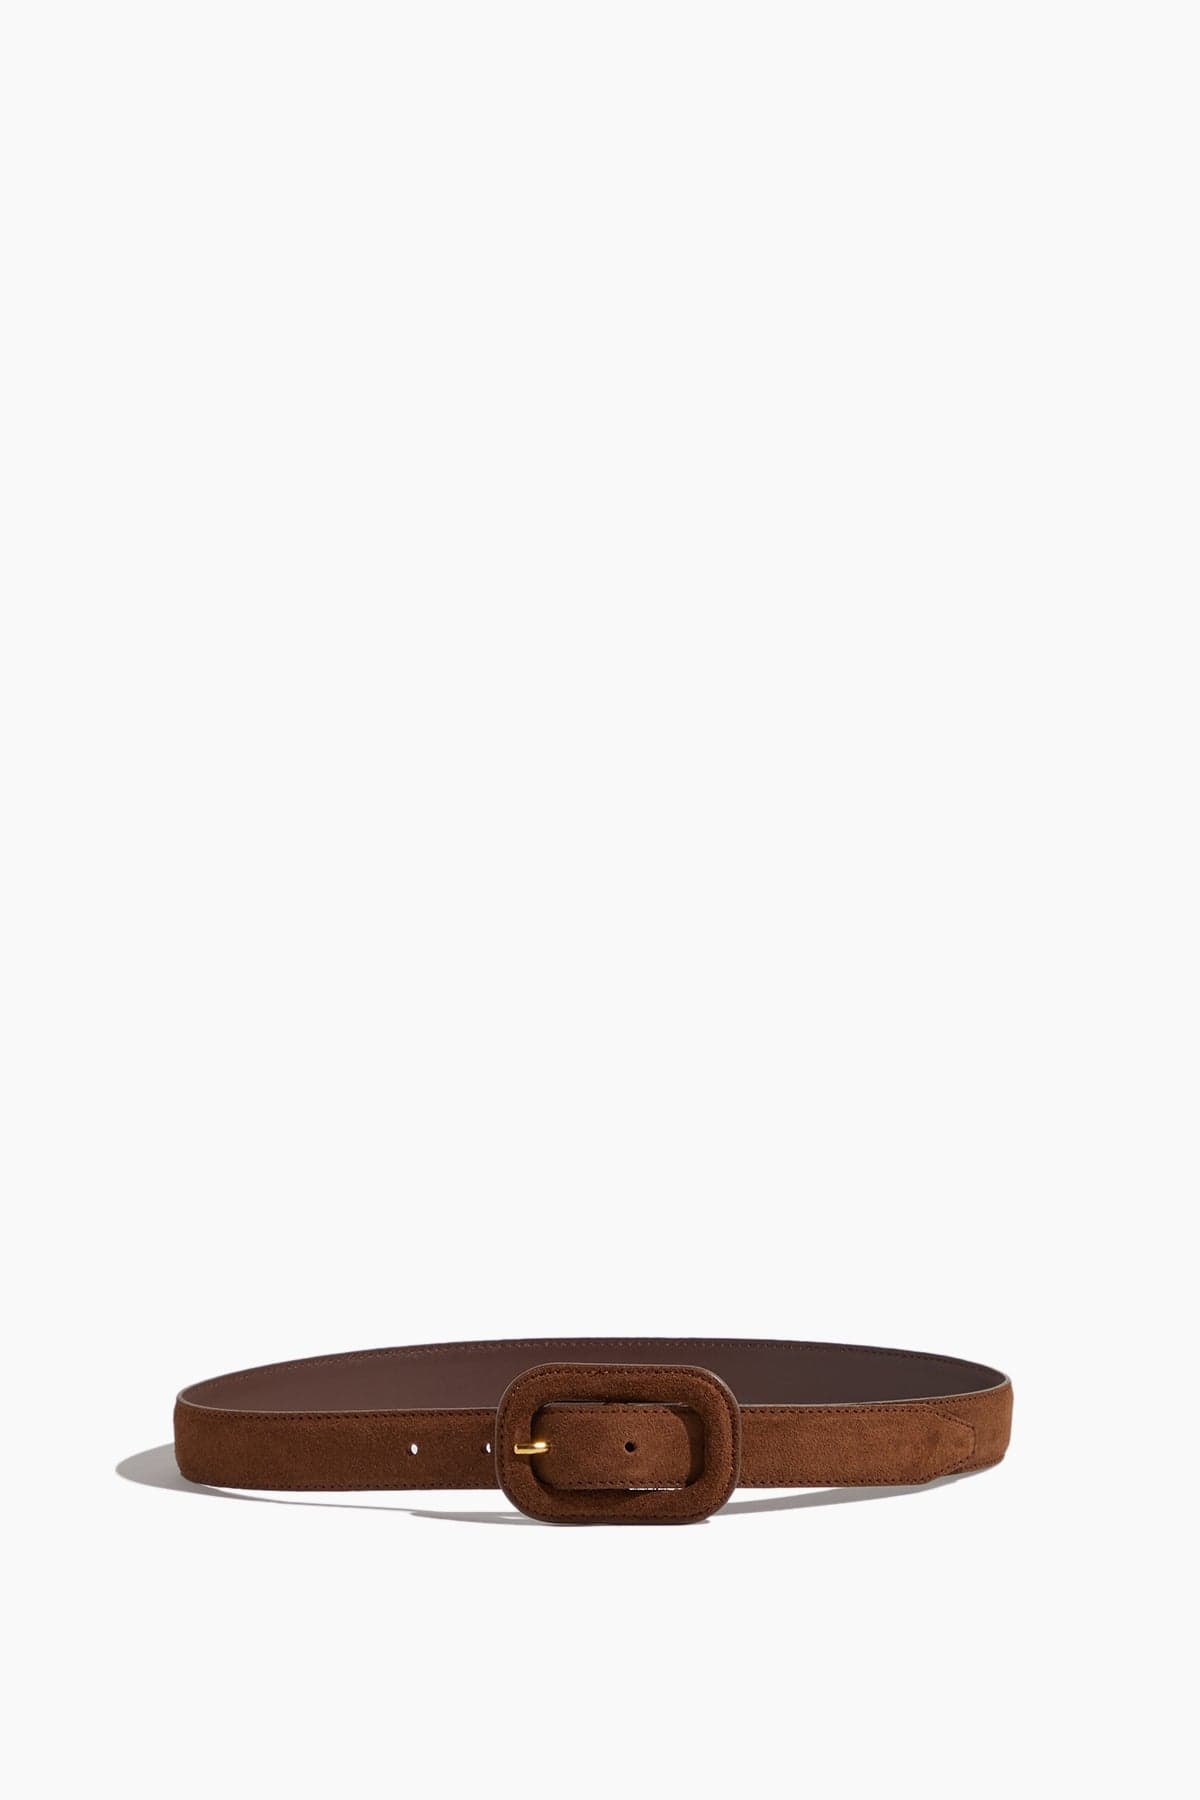 Covered Buckle Belt in Brown Suede - 1